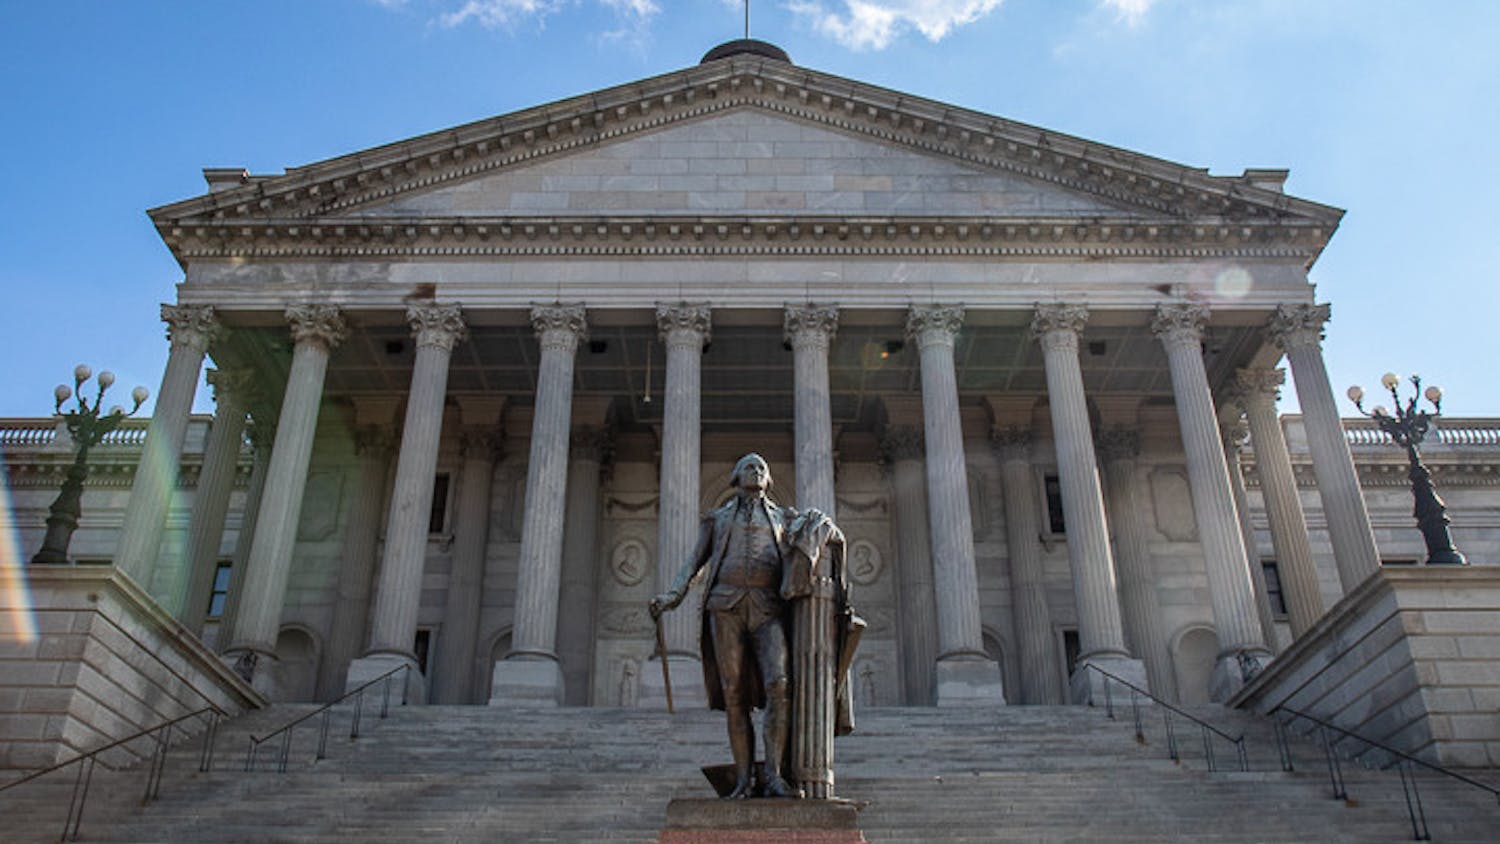 The George Washington Statue stands at the foot of the South Carolina Statehouse on Jan. 17, 2022. Governor Henry McMaster gave his sixth State of the State address at the statehouse on Jan. 25, 2023, covering topics from putting more money into education, state infrastructure and law enforcement to abortion and minimum wage.